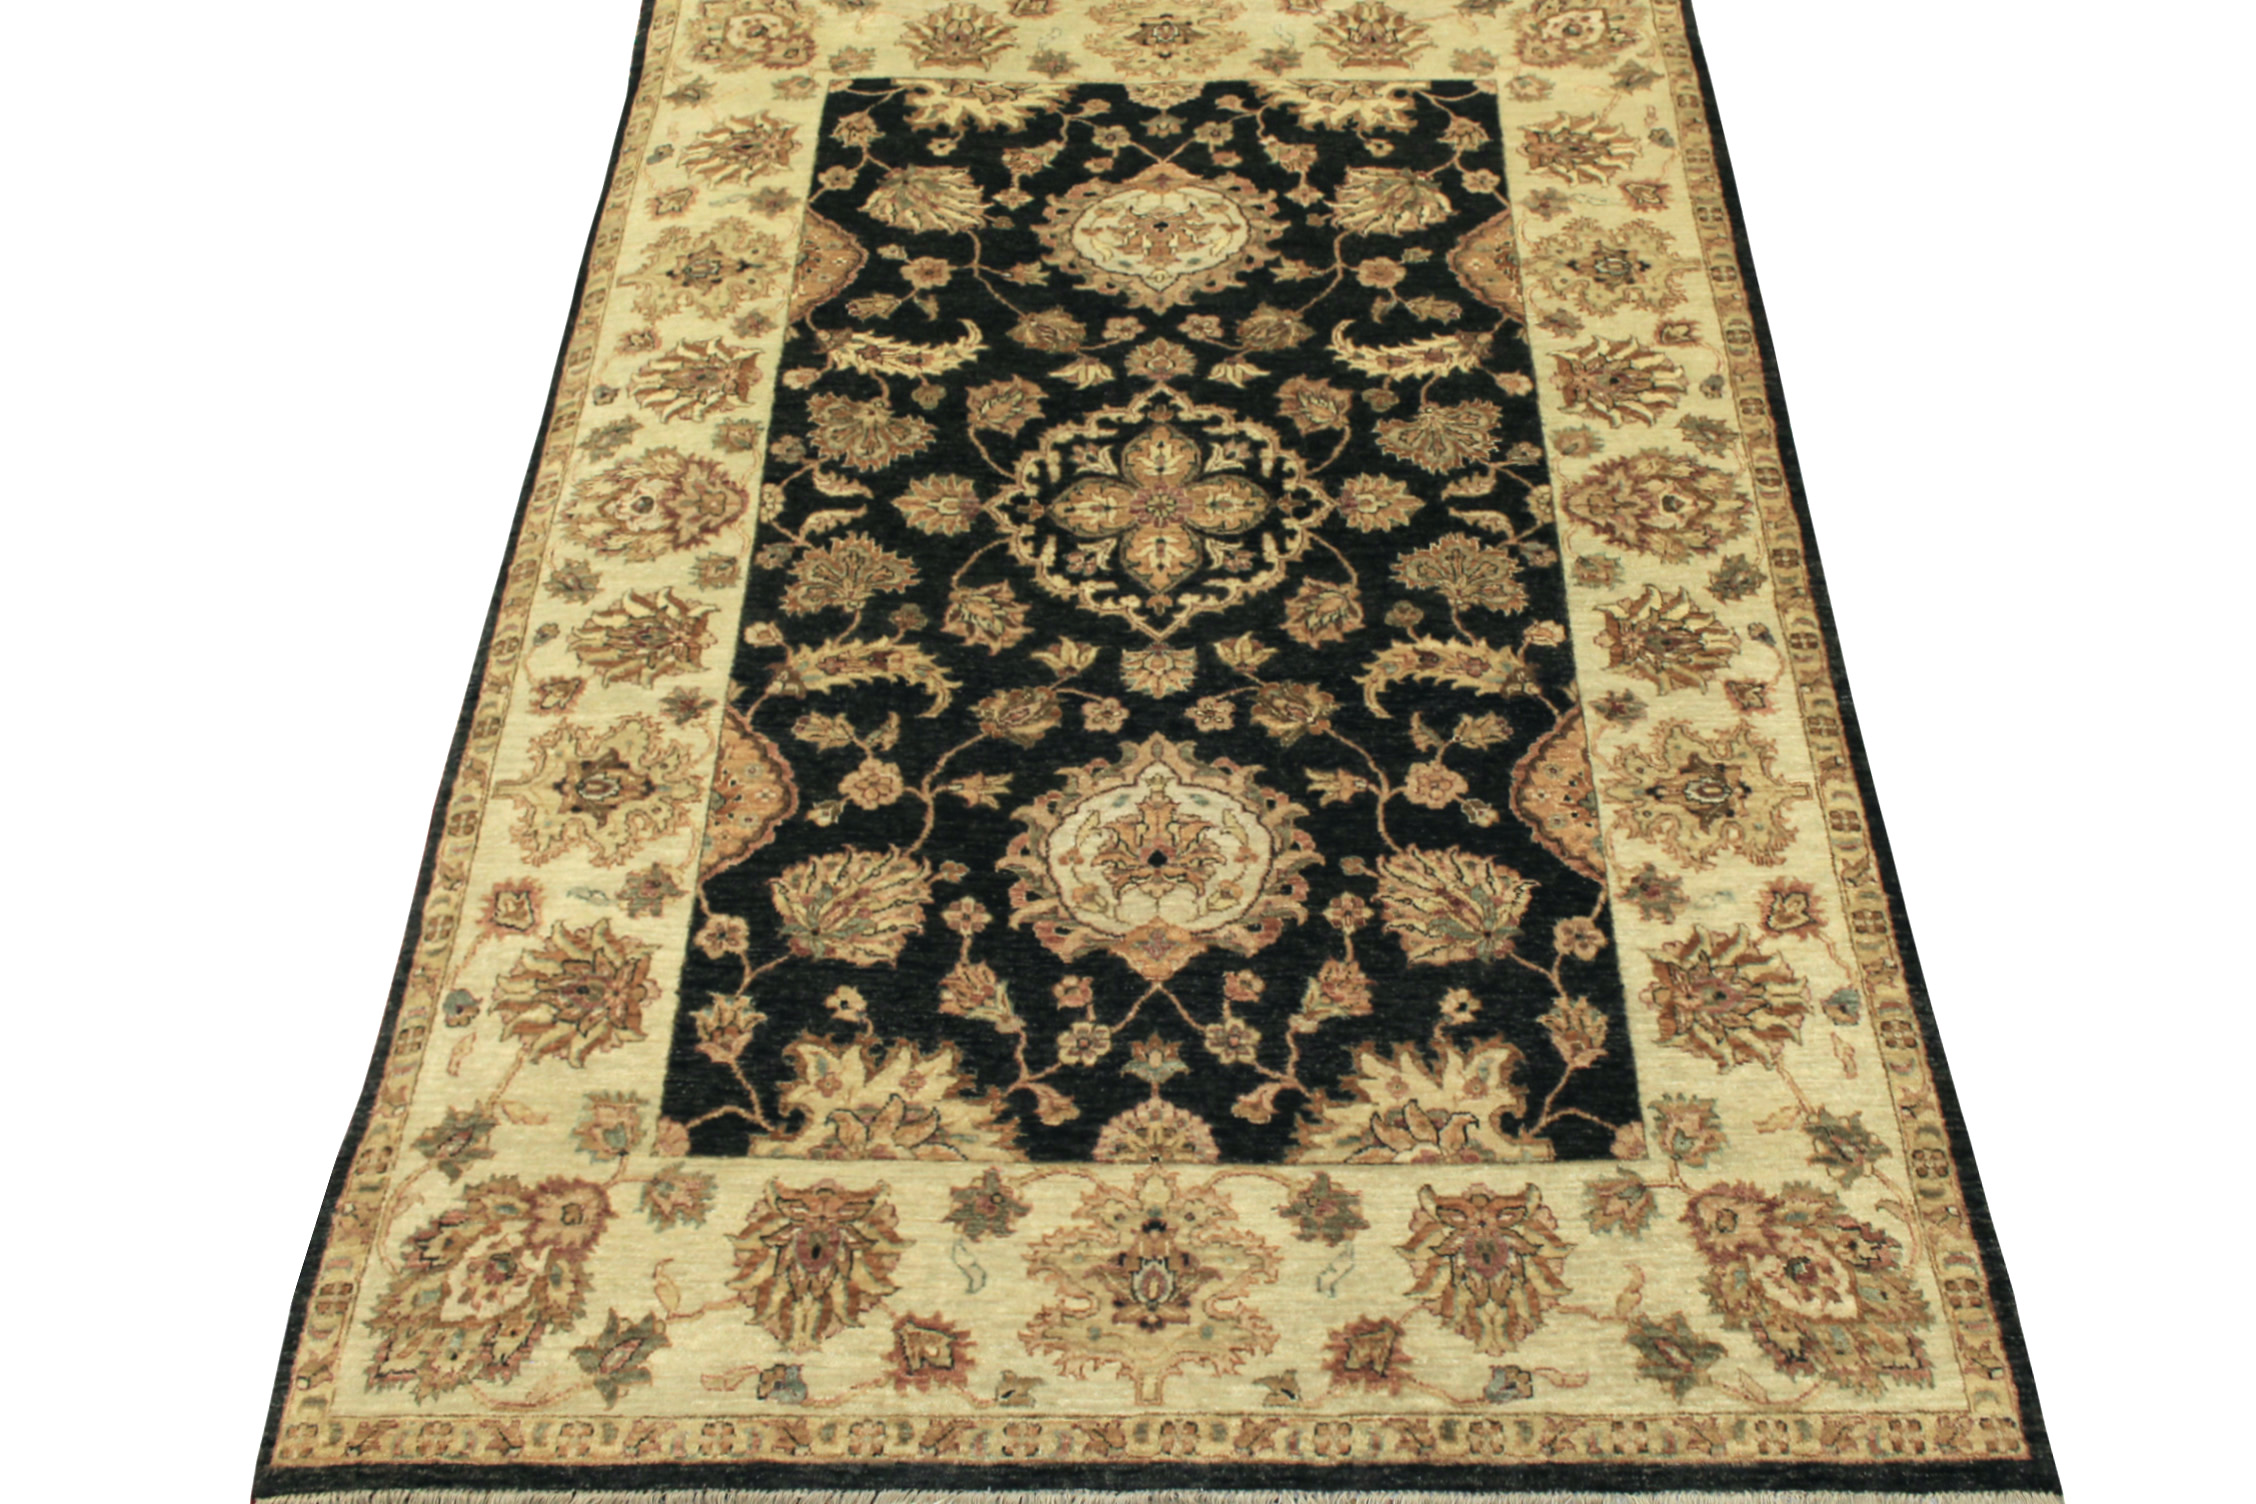 6x9 Traditional Hand Knotted Wool Area Rug - MR11370